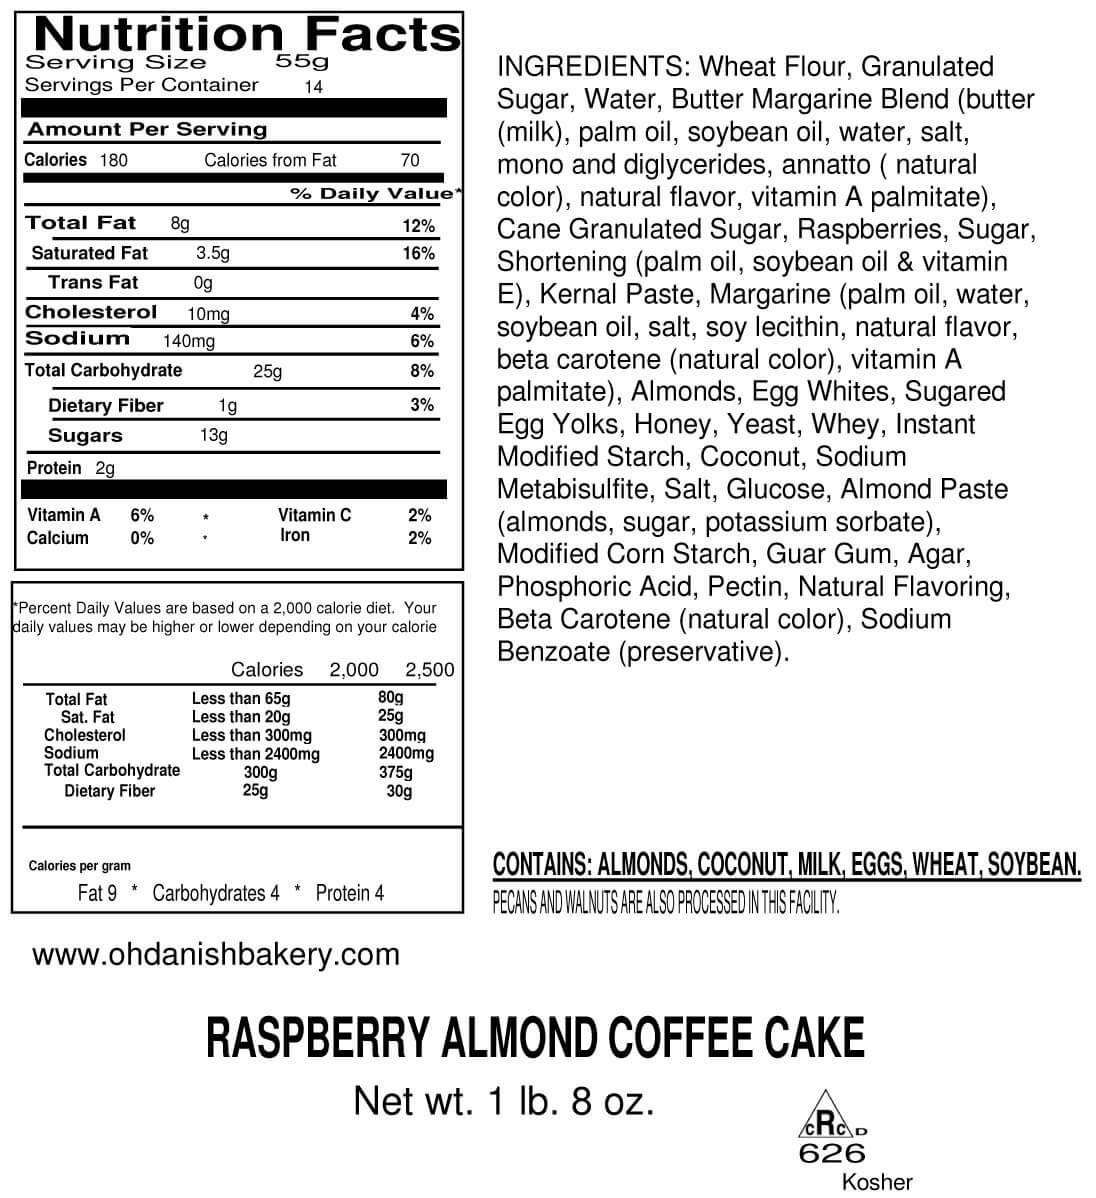 Nutritional Label for Raspberry Almond Coffee Cake